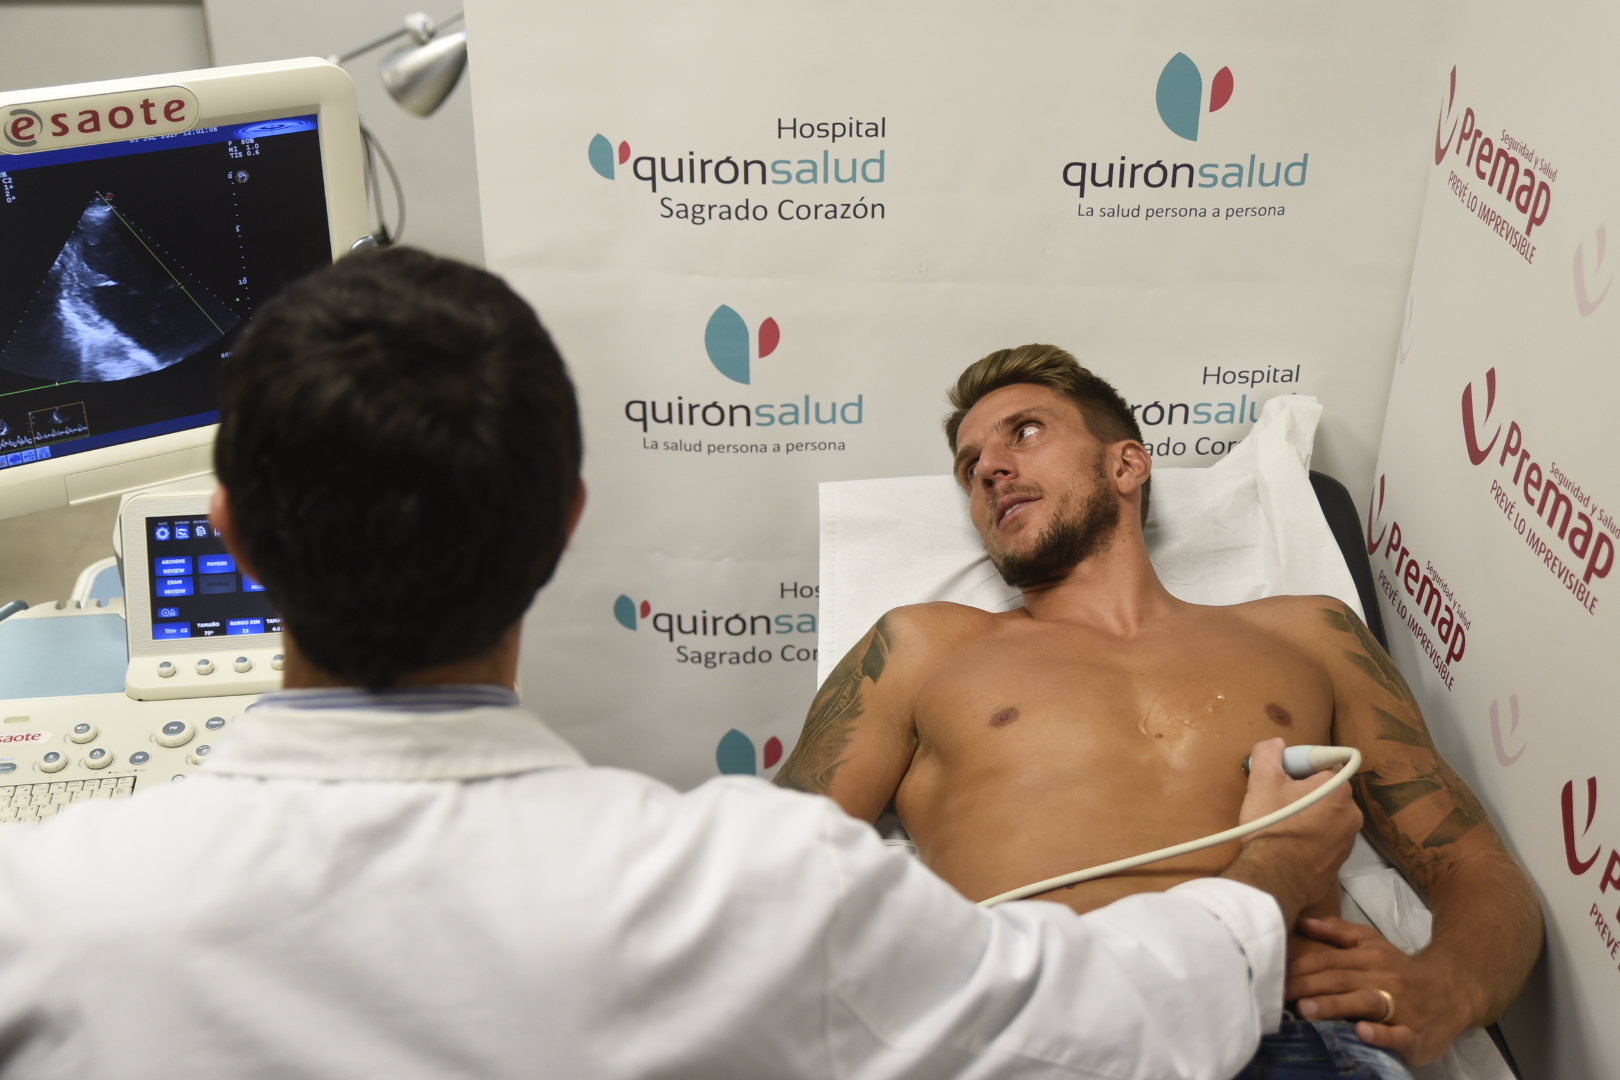 Carriço during a medical check-up